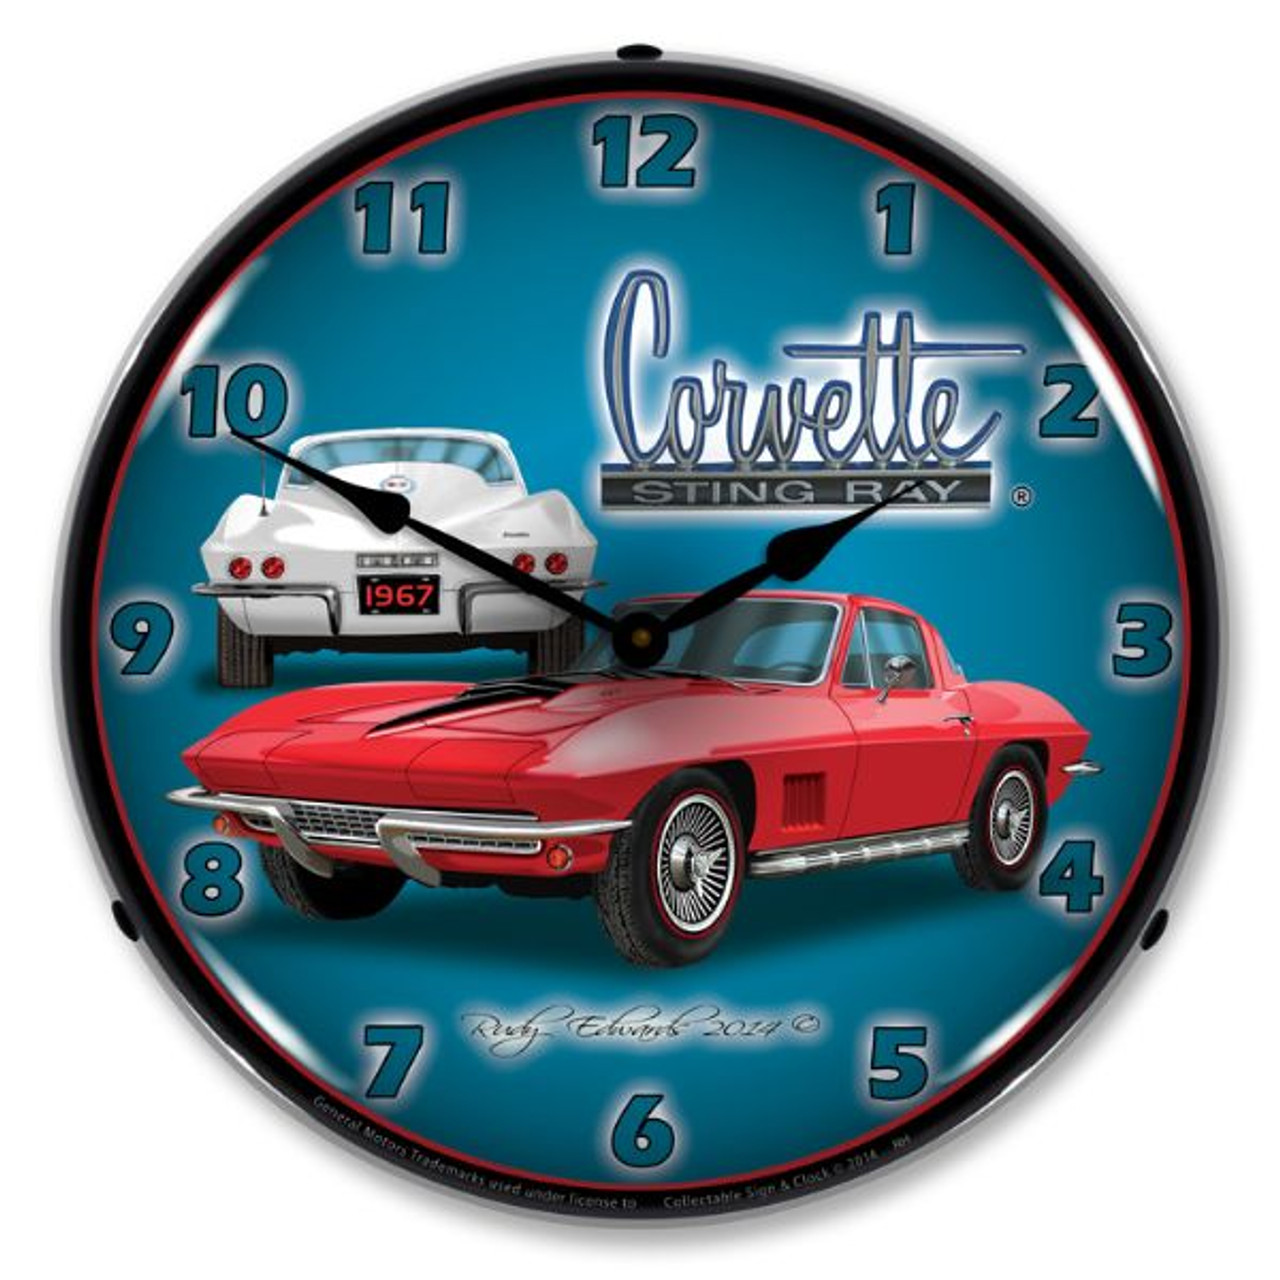 1967 Corvette Stingray Lighted Wall Clock 14 x 14 Inches